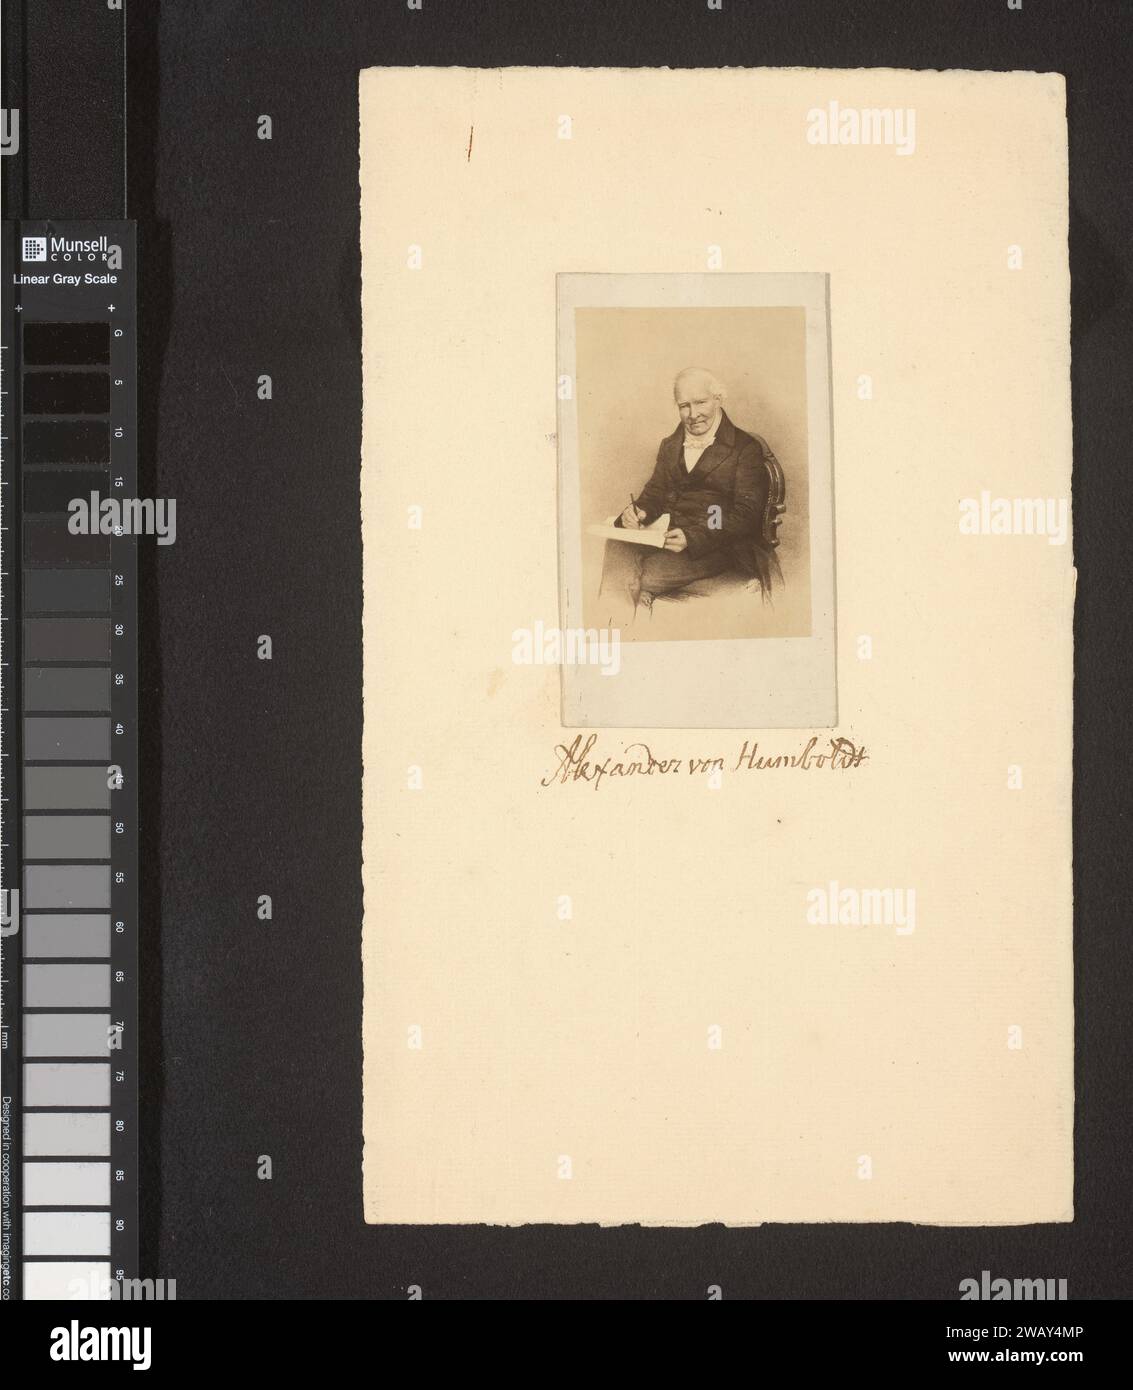 Photo production of a lithograph with a portrait by Alexander von Humboldt, Anonymous, 1860 - 1875 Photograph. visit card   paper. cardboard albumen print historical persons. science and technology (+ portrait of scholar, scientist) Stock Photo